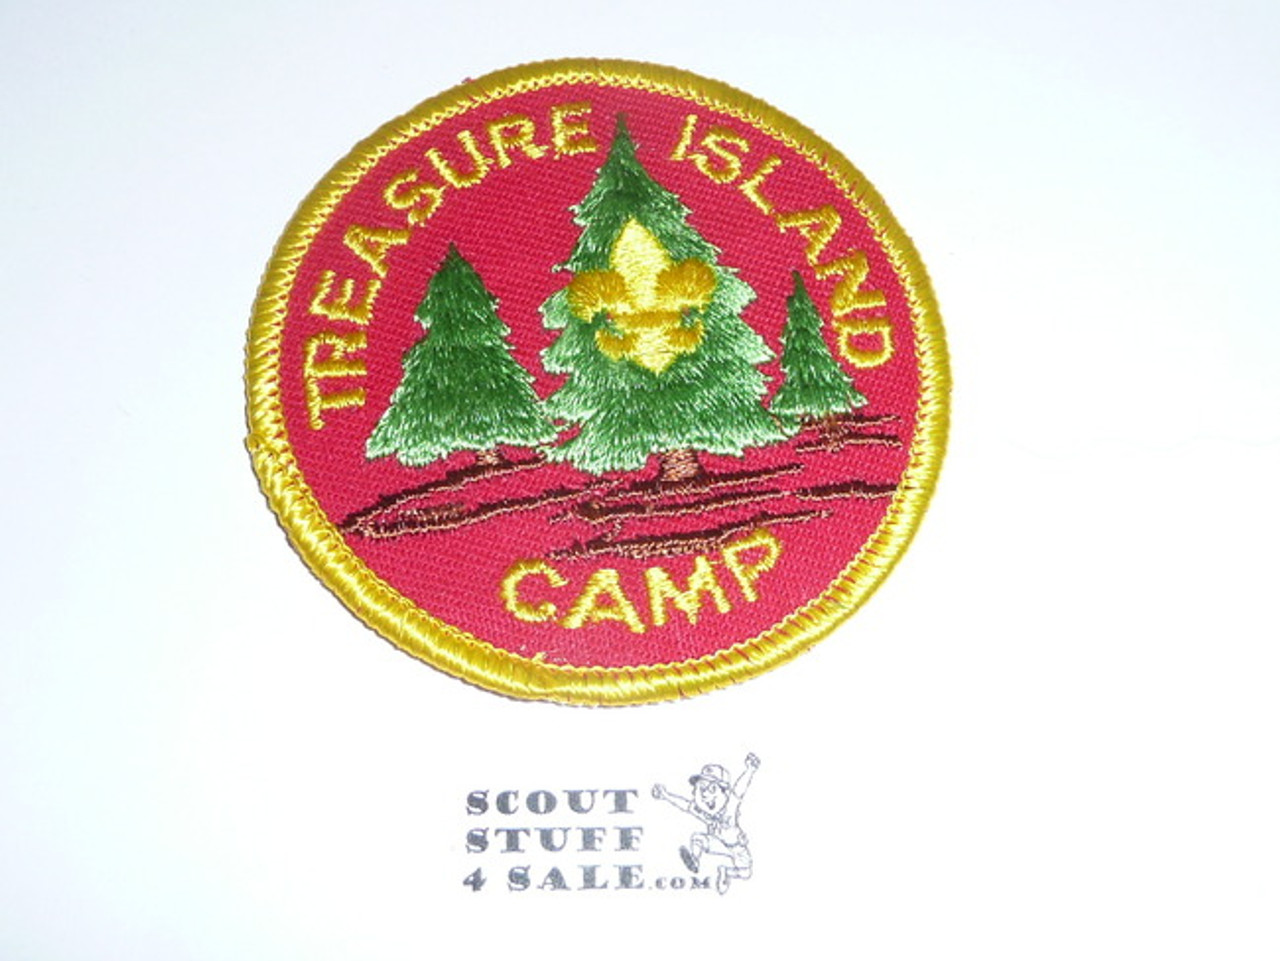 Treasure Island Camp Patch with yellow bdr